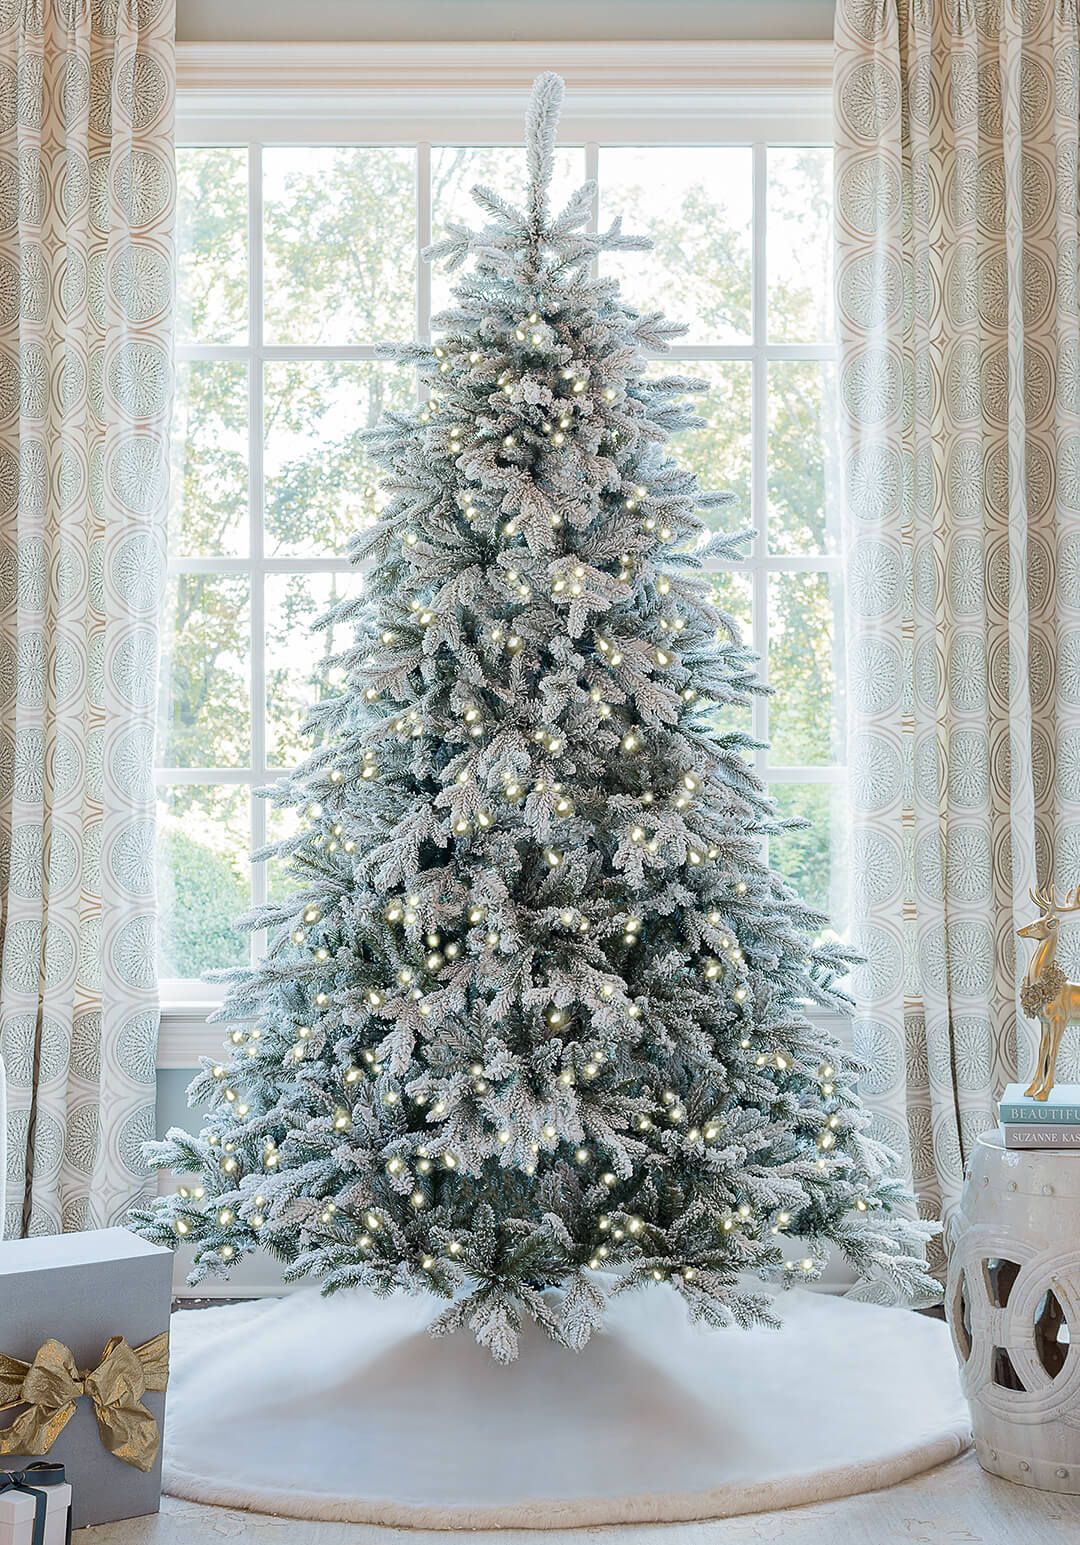 10 Foot Queen Flock™ Artificial Christmas Tree 1200 LED Lights | King of Christmas